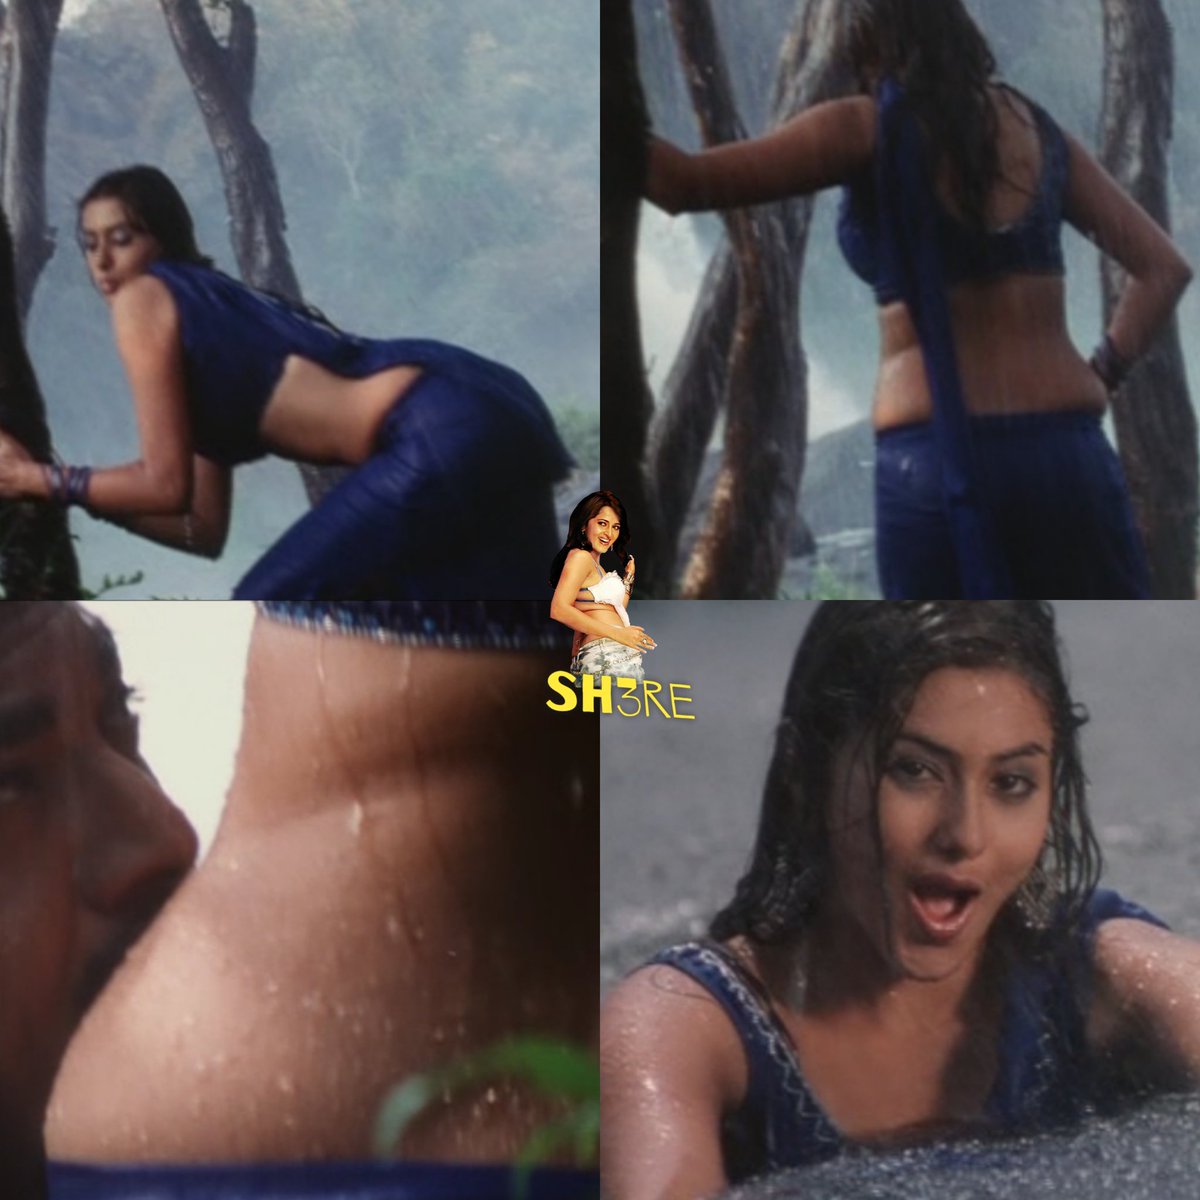 How many know that #namitha rejected the costumes at first to shoot this song?

After convincing her
REST IS HISTORY

#Hbdnamitha #HappyBirthdayNamitha 

Link: we.tl/t-MxxzC5kxgV

2K no watermark rip

@kaamaveriyan25 @NavelAddicts @Thara_addict @NavelVeriyan @juicythoppul